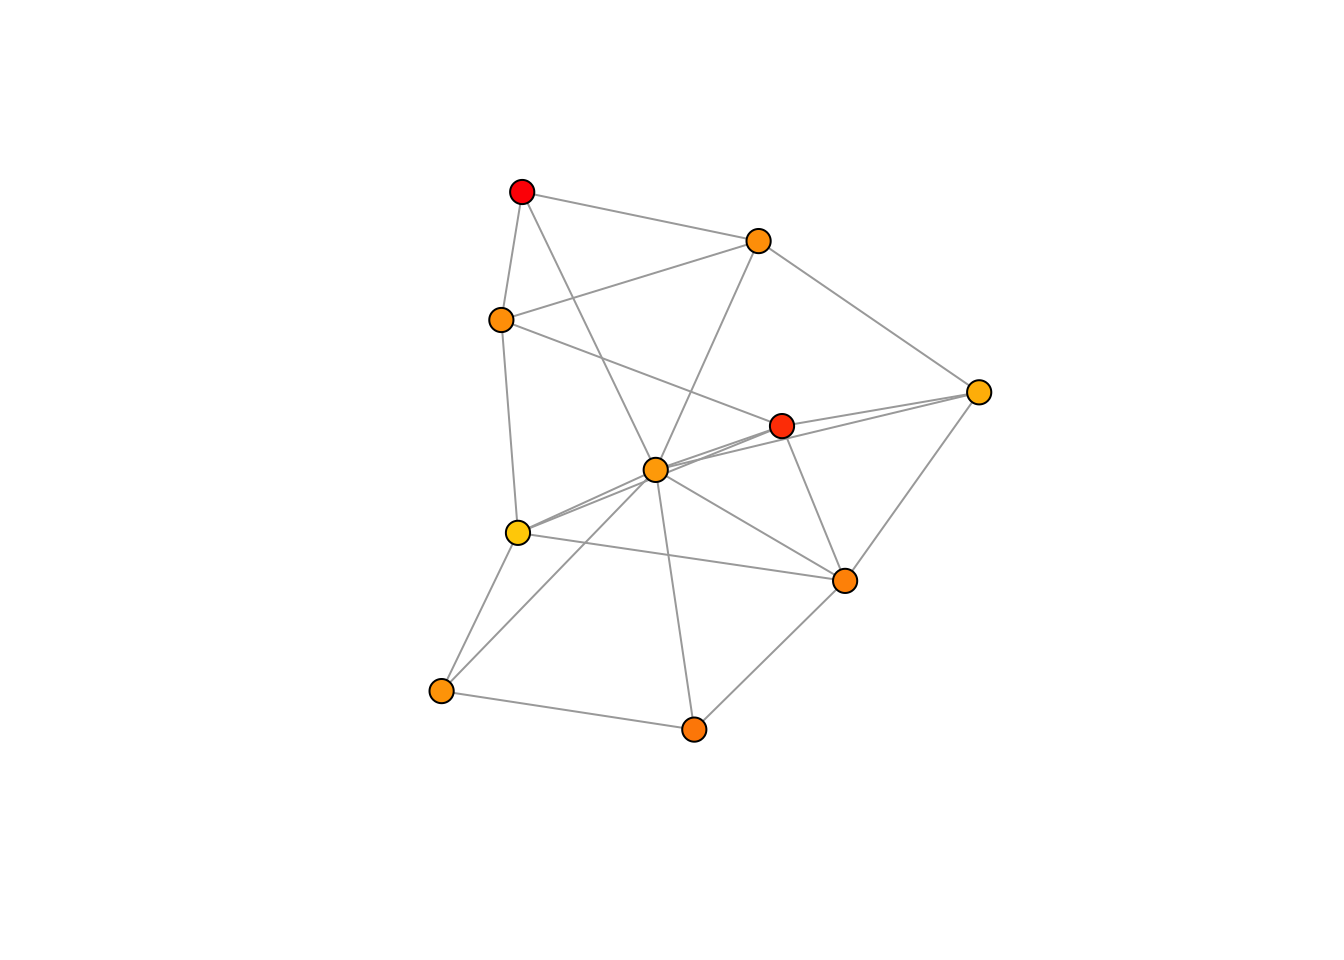 A cleaner version of the same network.